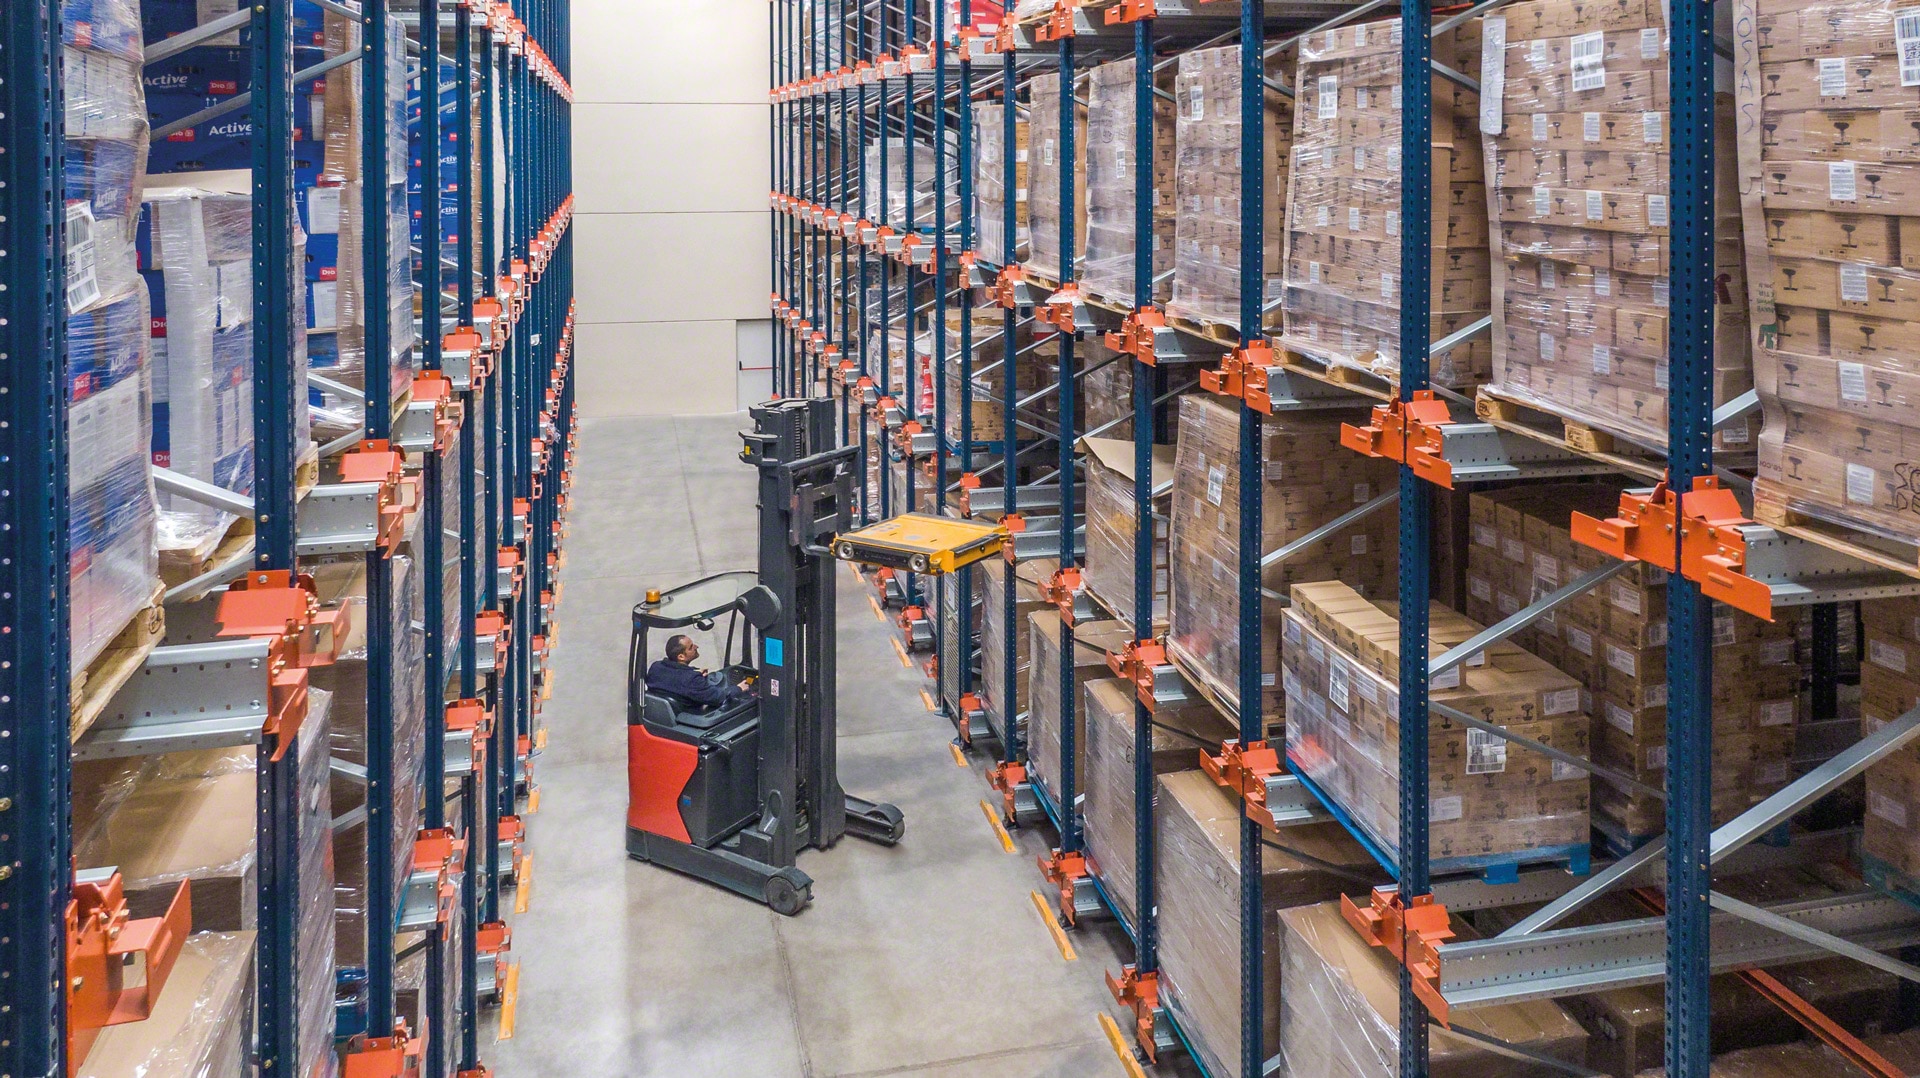 Forklift trucks place the shuttle in the storage channel to store or extract the goods in the high-density systems